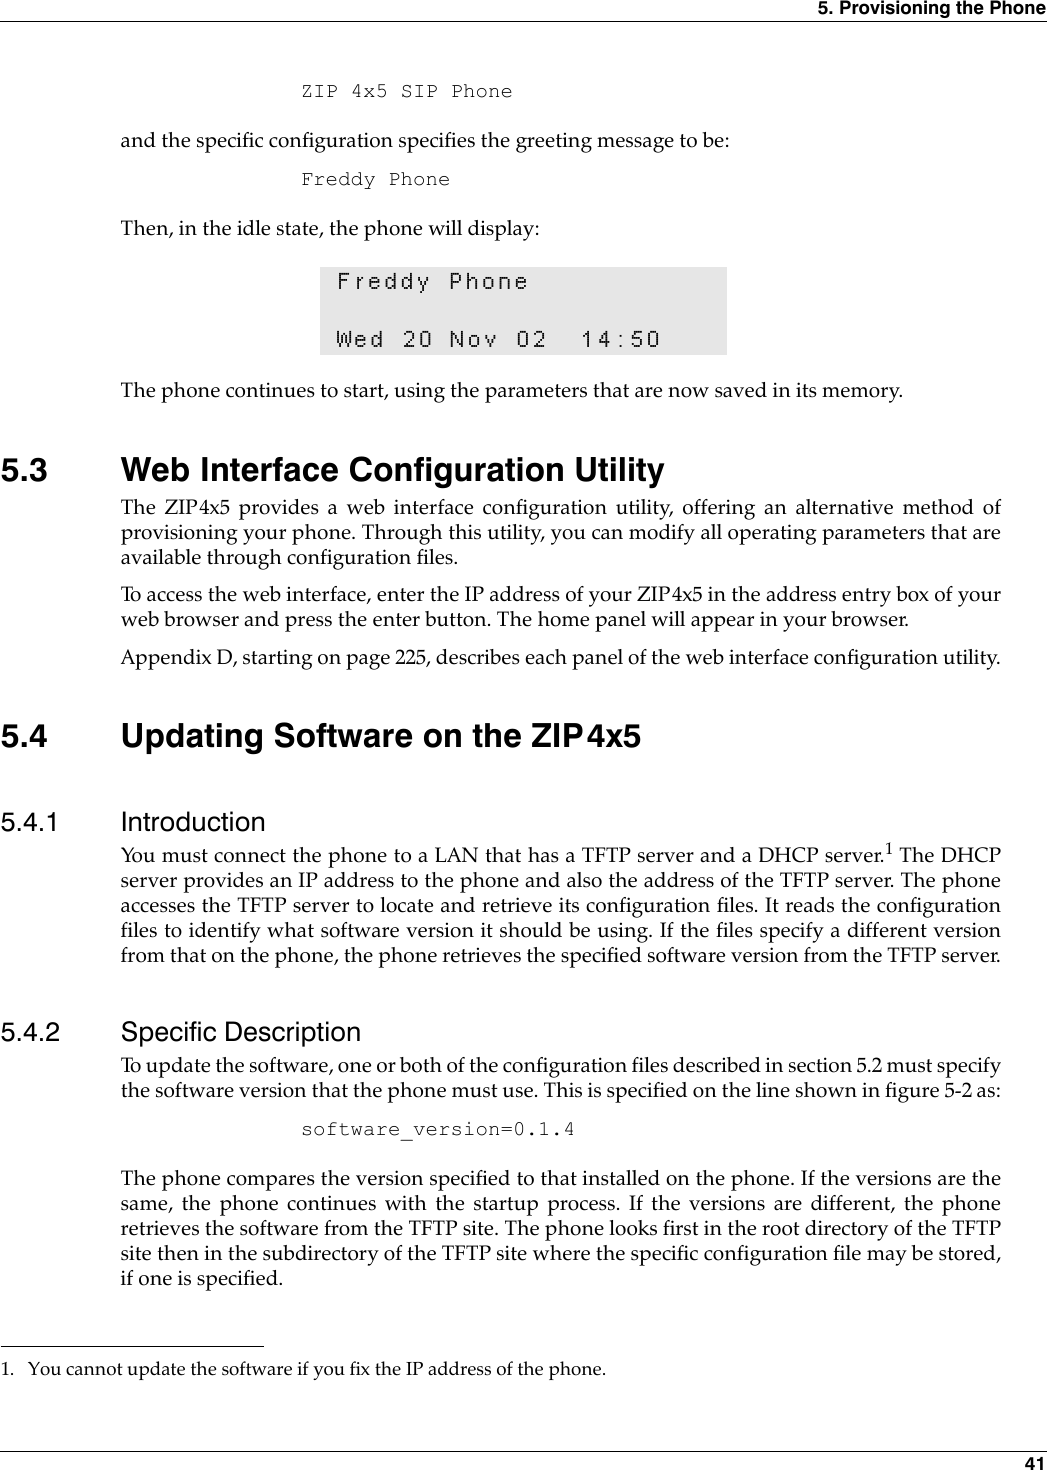 5. Provisioning the Phone 41ZIP 4x5 SIP Phoneand the specific configuration specifies the greeting message to be:Freddy PhoneThen, in the idle state, the phone will display: The phone continues to start, using the parameters that are now saved in its memory.5.3 Web Interface Configuration UtilityThe ZIP4x5 provides a web interface configuration utility, offering an alternative method ofprovisioning your phone. Through this utility, you can modify all operating parameters that areavailable through configuration files. To access the web interface, enter the IP address of your ZIP4x5 in the address entry box of yourweb browser and press the enter button. The home panel will appear in your browser.Appendix D, starting on page 225, describes each panel of the web interface configuration utility.5.4 Updating Software on the ZIP4x55.4.1 IntroductionYou must connect the phone to a LAN that has a TFTP server and a DHCP server.1 The DHCPserver provides an IP address to the phone and also the address of the TFTP server. The phoneaccesses the TFTP server to locate and retrieve its configuration files. It reads the configurationfiles to identify what software version it should be using. If the files specify a different versionfrom that on the phone, the phone retrieves the specified software version from the TFTP server.5.4.2 Specific DescriptionTo update the software, one or both of the configuration files described in section 5.2 must specifythe software version that the phone must use. This is specified on the line shown in figure 5-2 as:software_version=0.1.4The phone compares the version specified to that installed on the phone. If the versions are thesame, the phone continues with the startup process. If the versions are different, the phoneretrieves the software from the TFTP site. The phone looks first in the root directory of the TFTPsite then in the subdirectory of the TFTP site where the specific configuration file may be stored,if one is specified.Freddy PhoneWed 20 Nov 02 14:501. You cannot update the software if you fix the IP address of the phone.